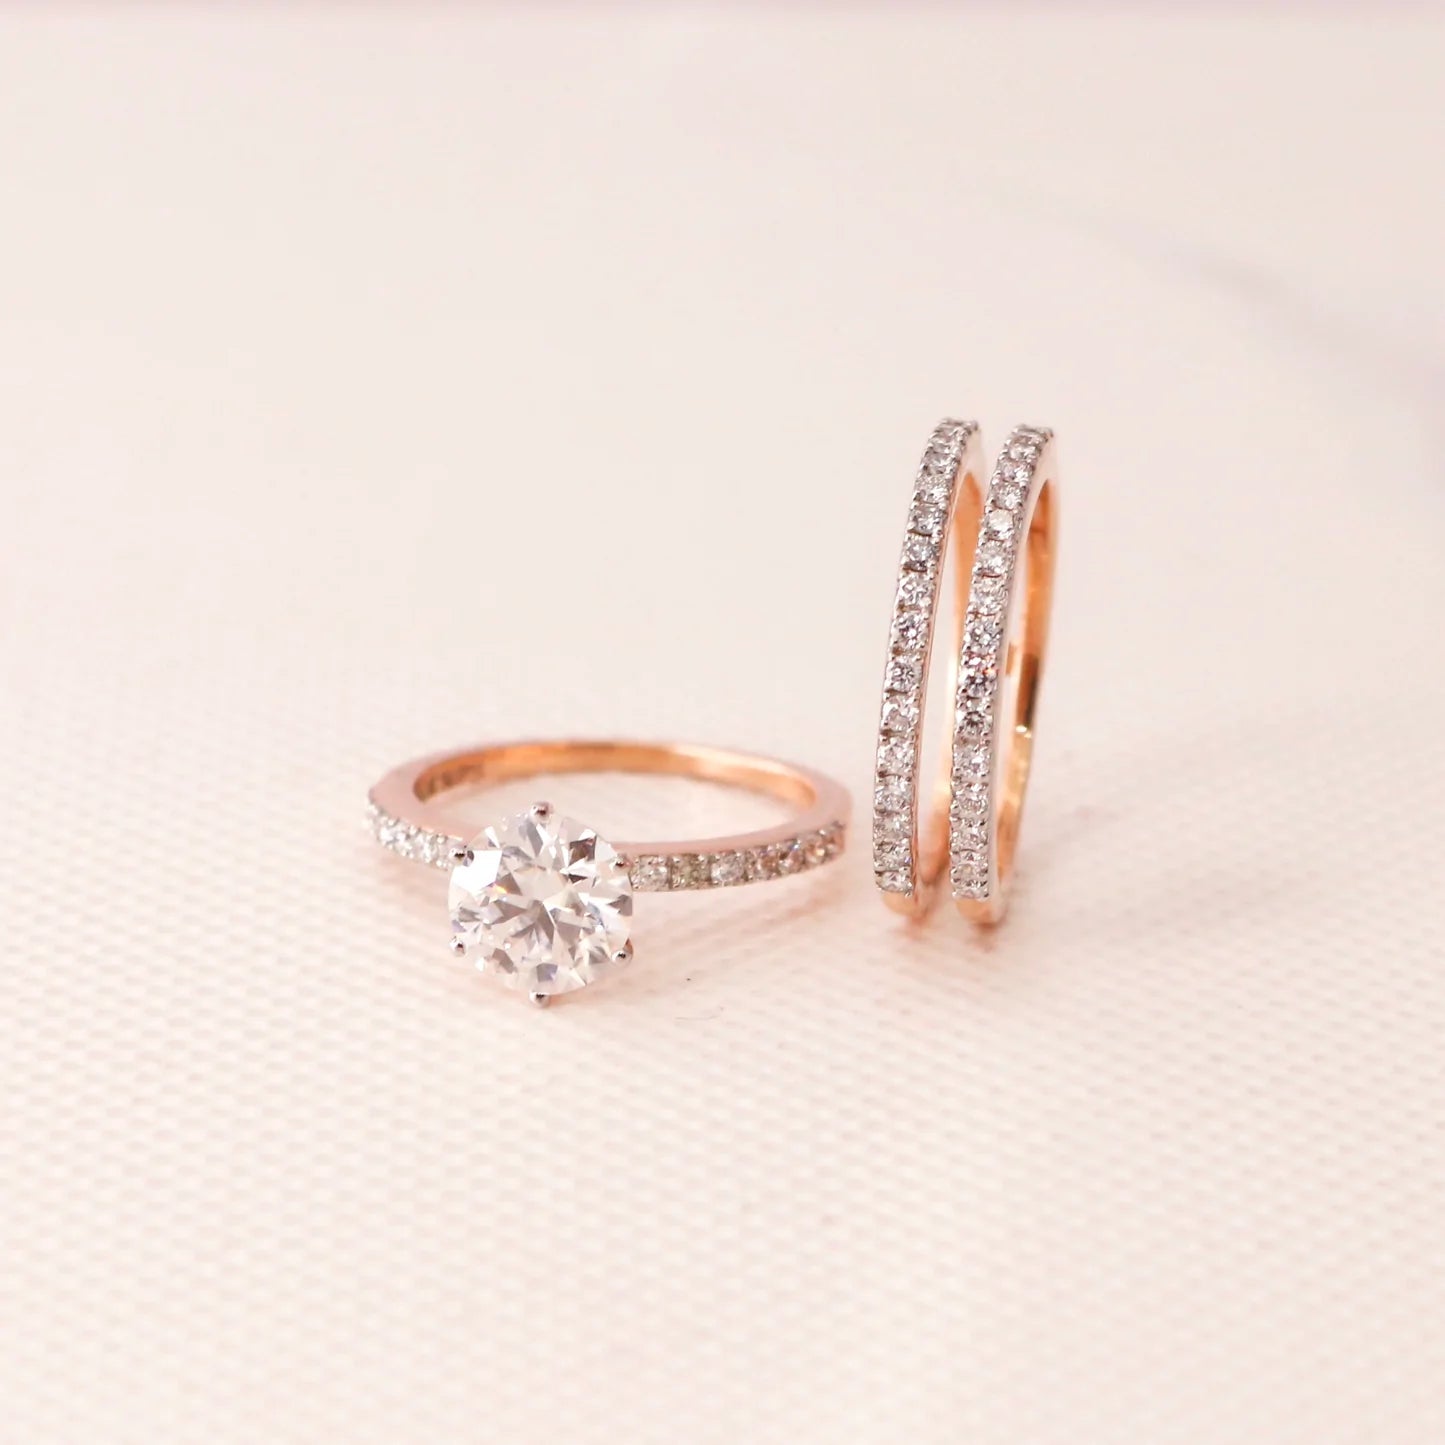 matching sets of eternity bands